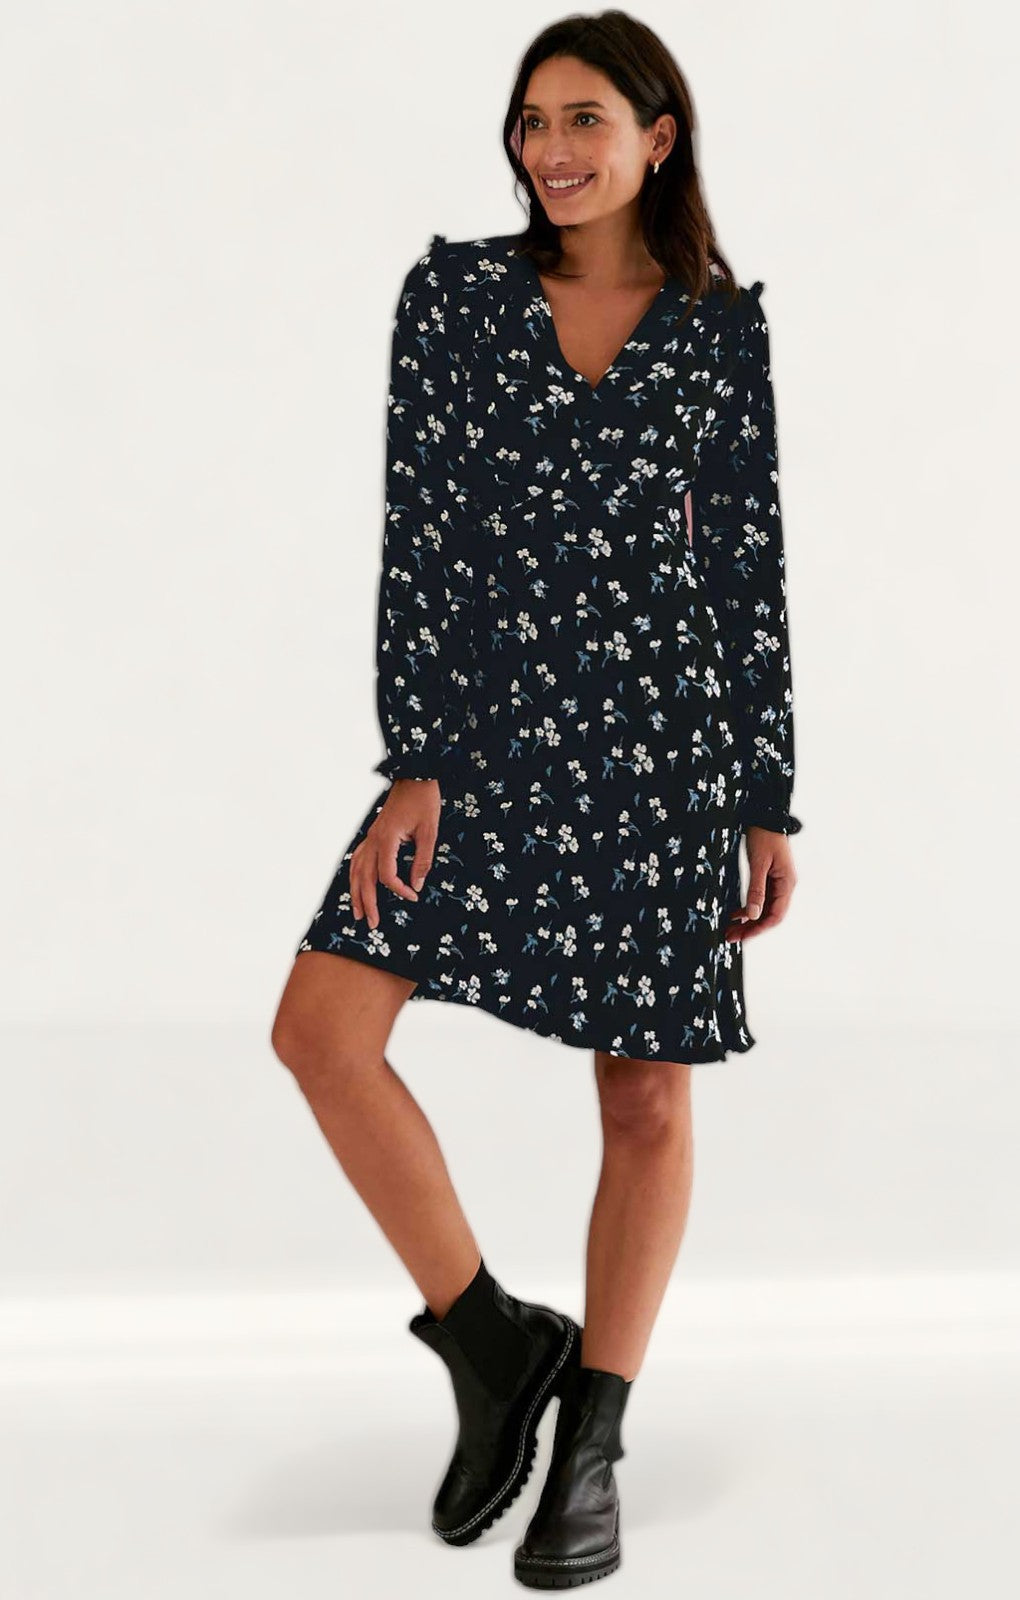 M&S X Ghost Floral Frill Detail Knee Length Tea Dress product image